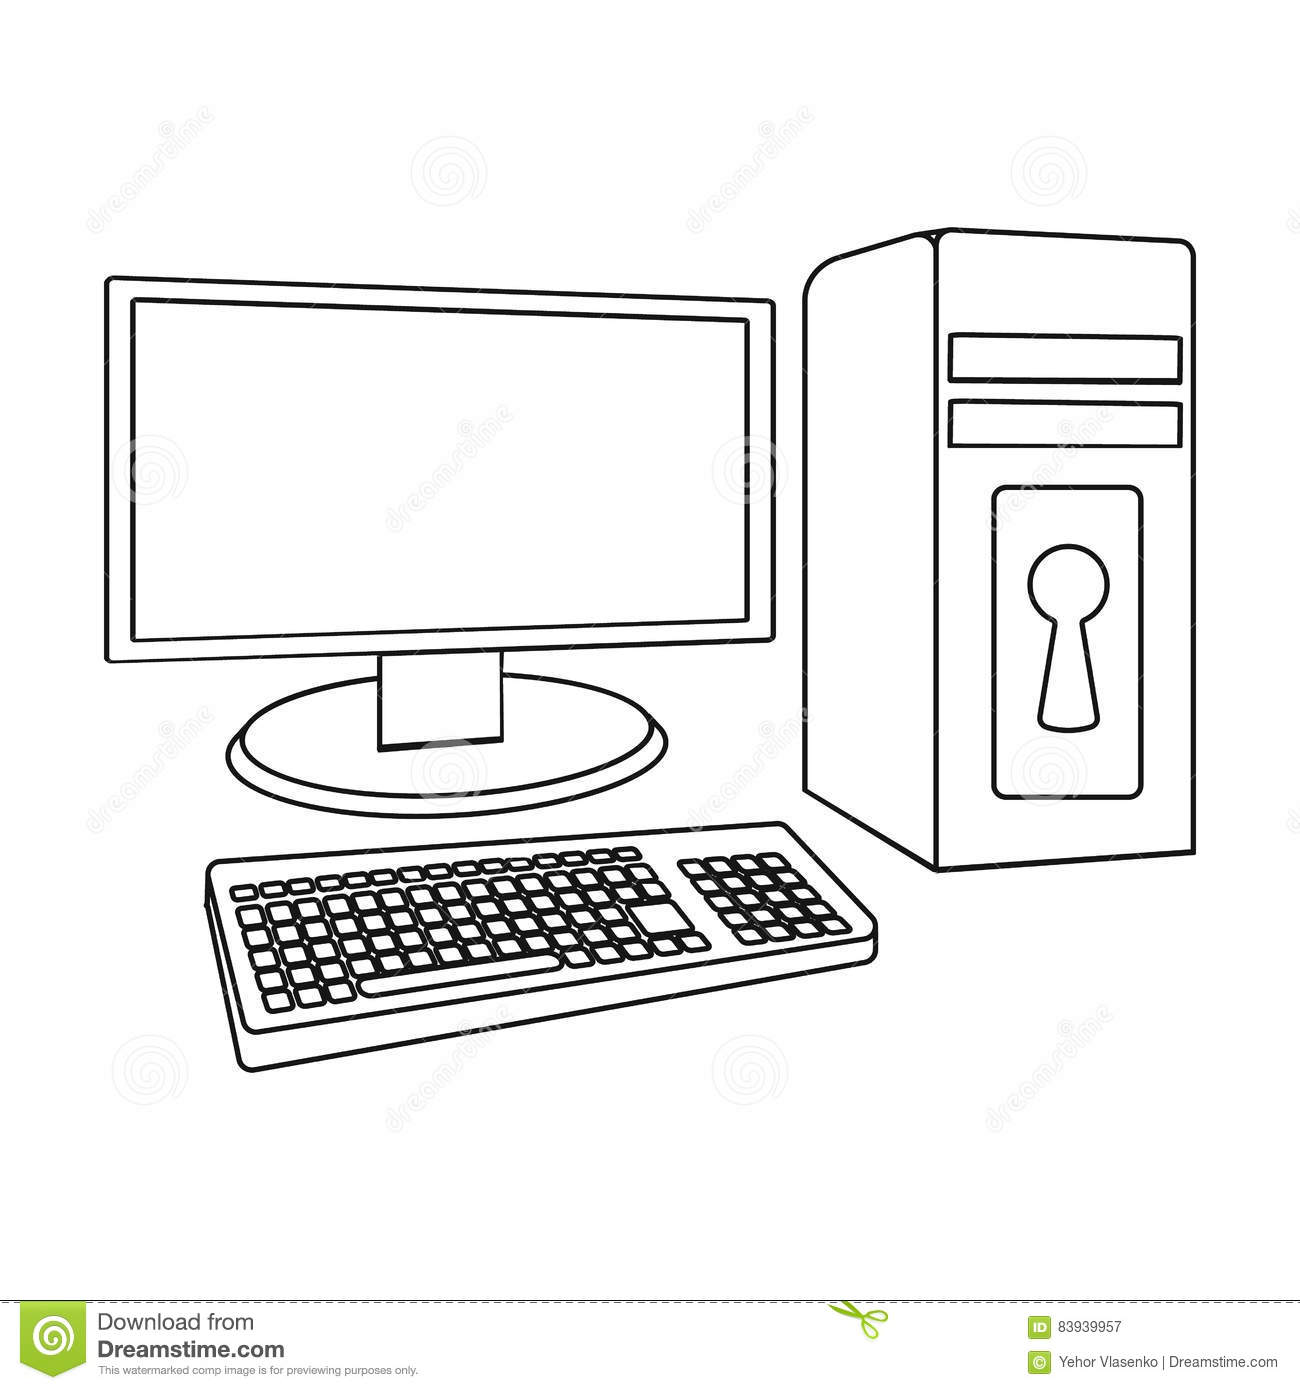 Computer outline clipart 4 » Clipart Station.